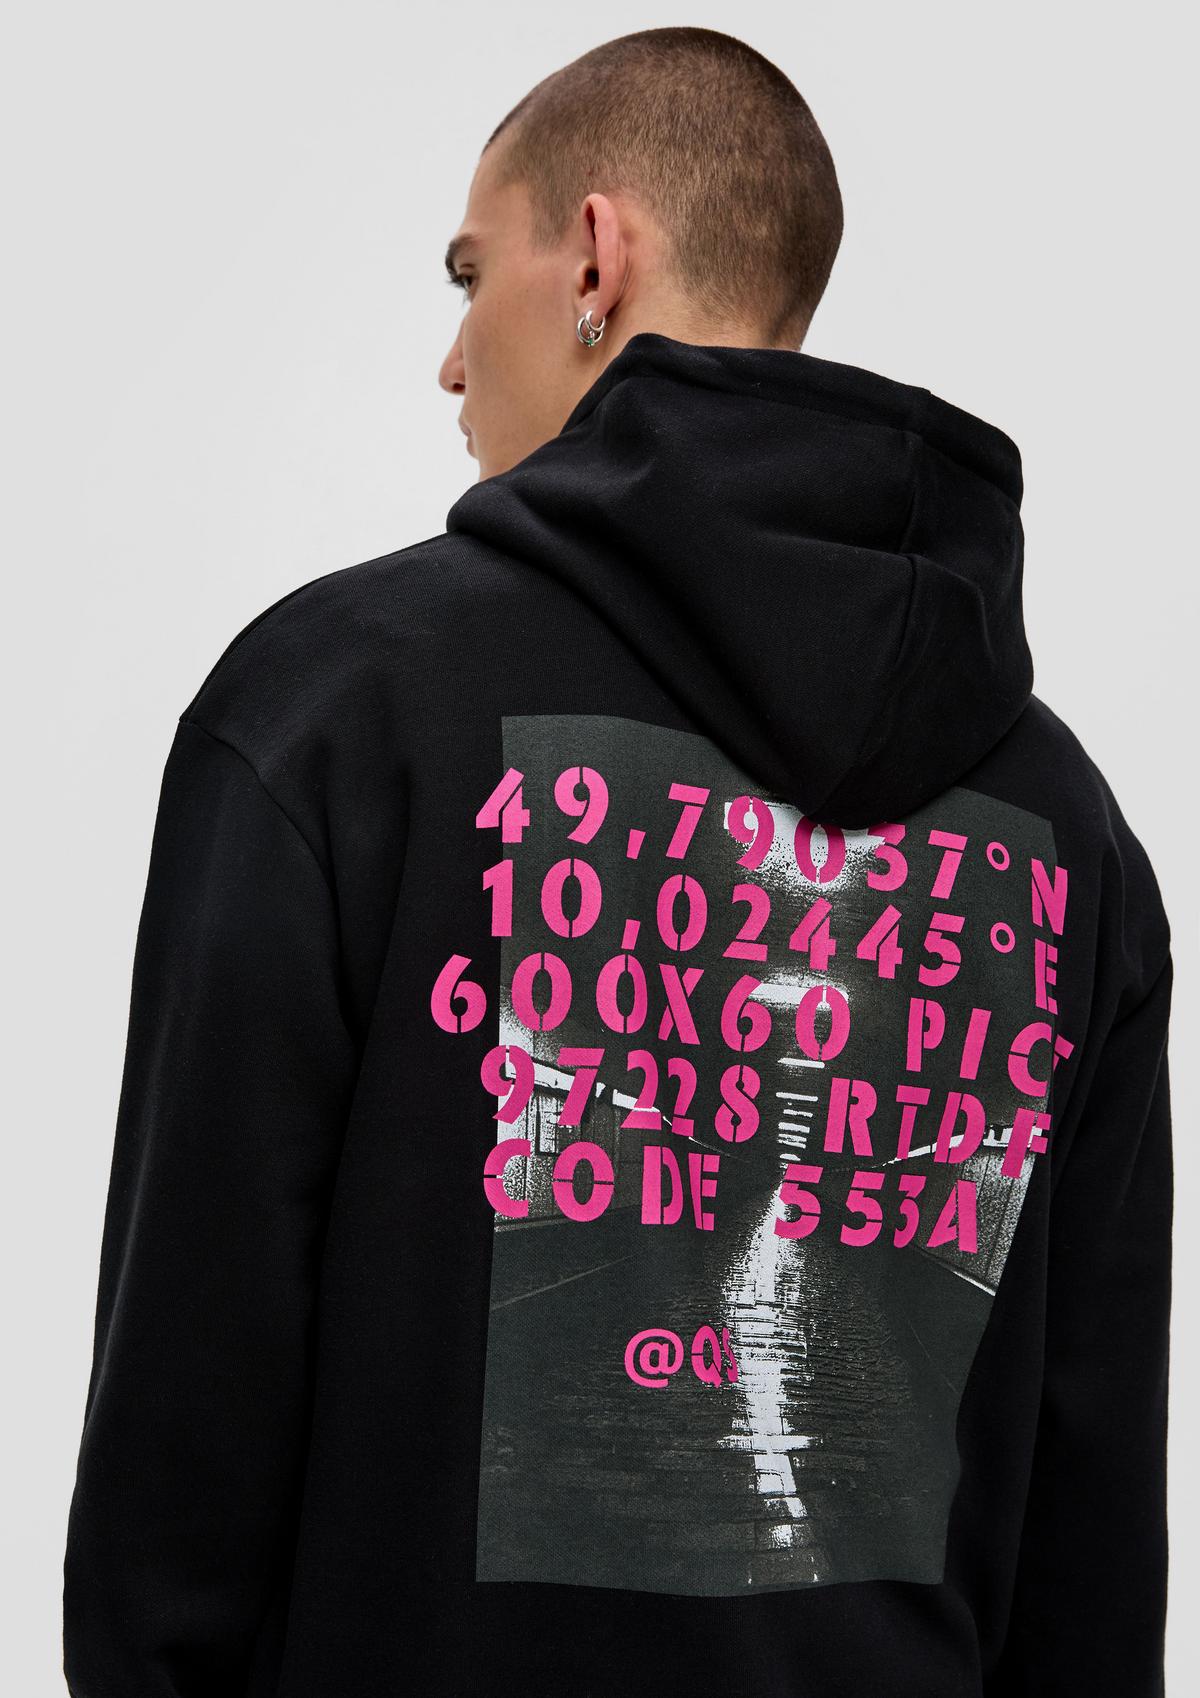 Sweatshirt with a front and back print - black